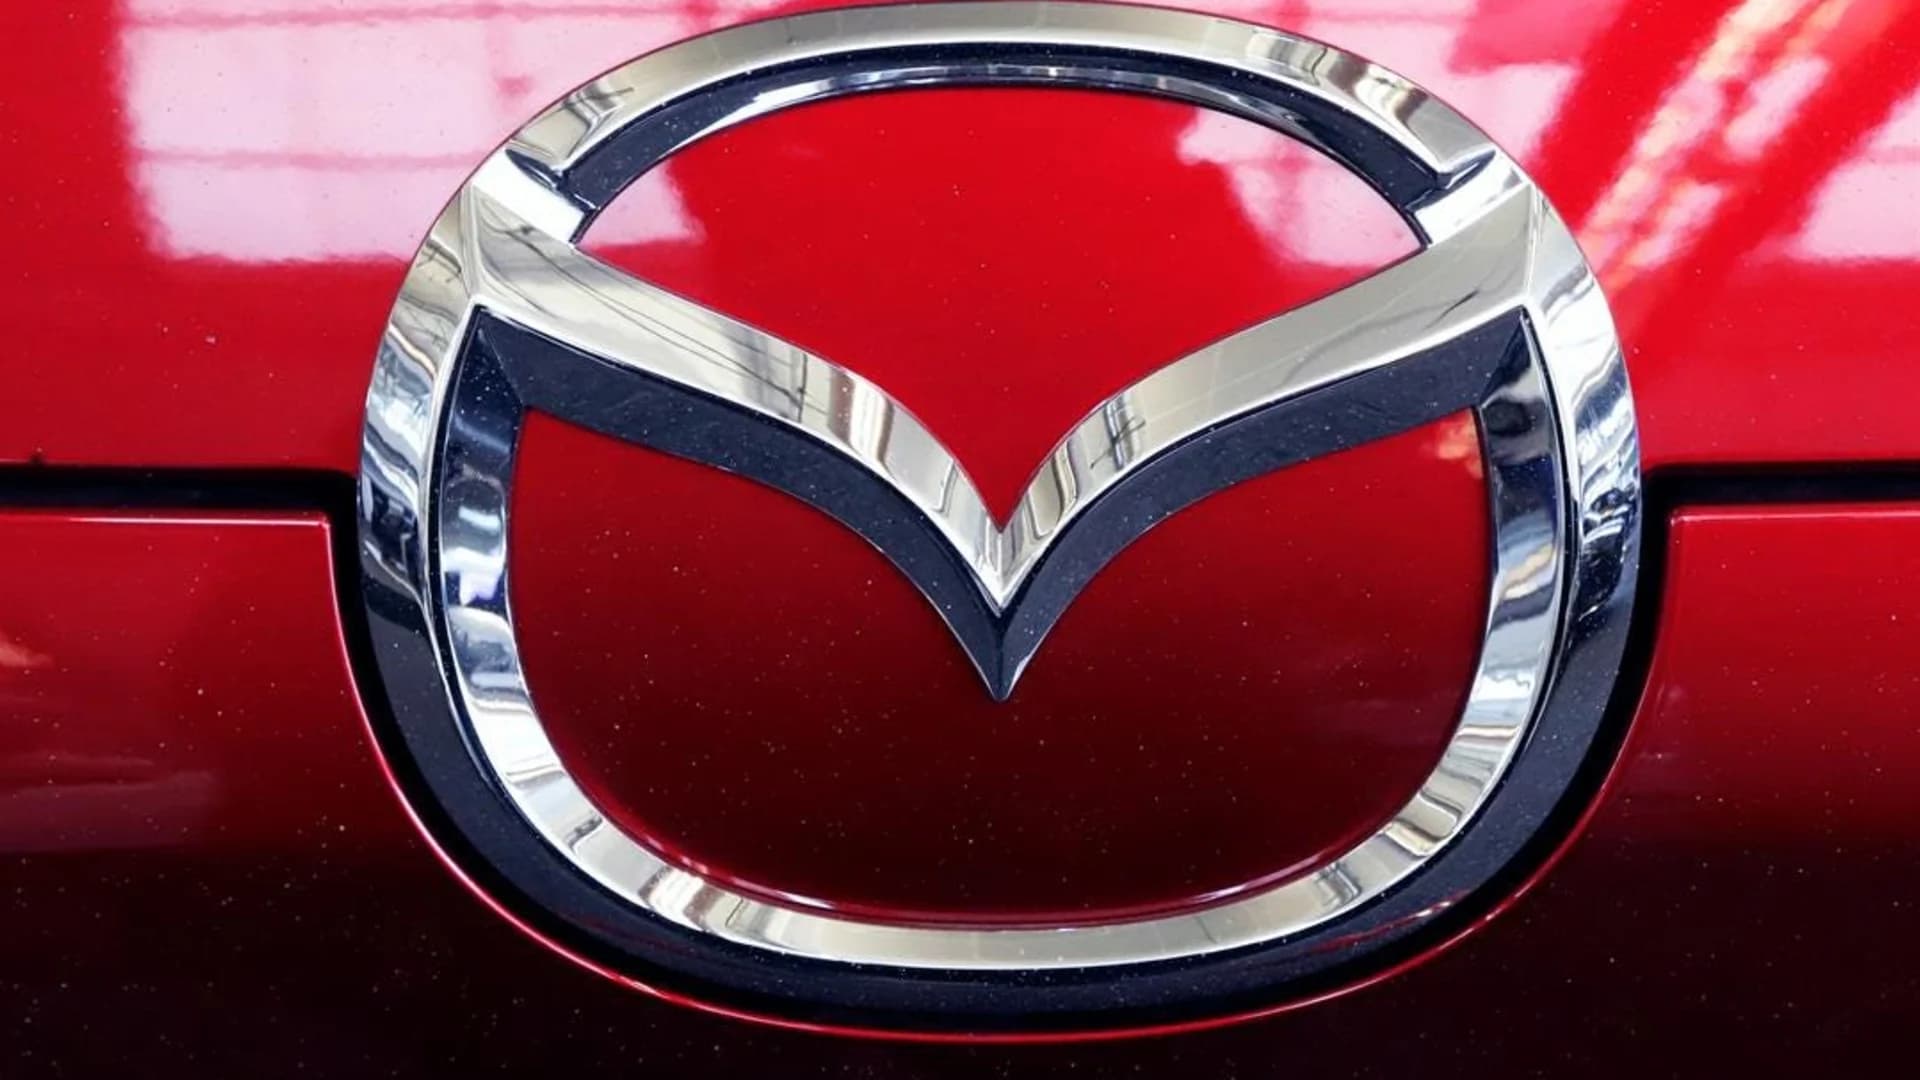 Mazda recalls nearly 190K cars due to failing wipers